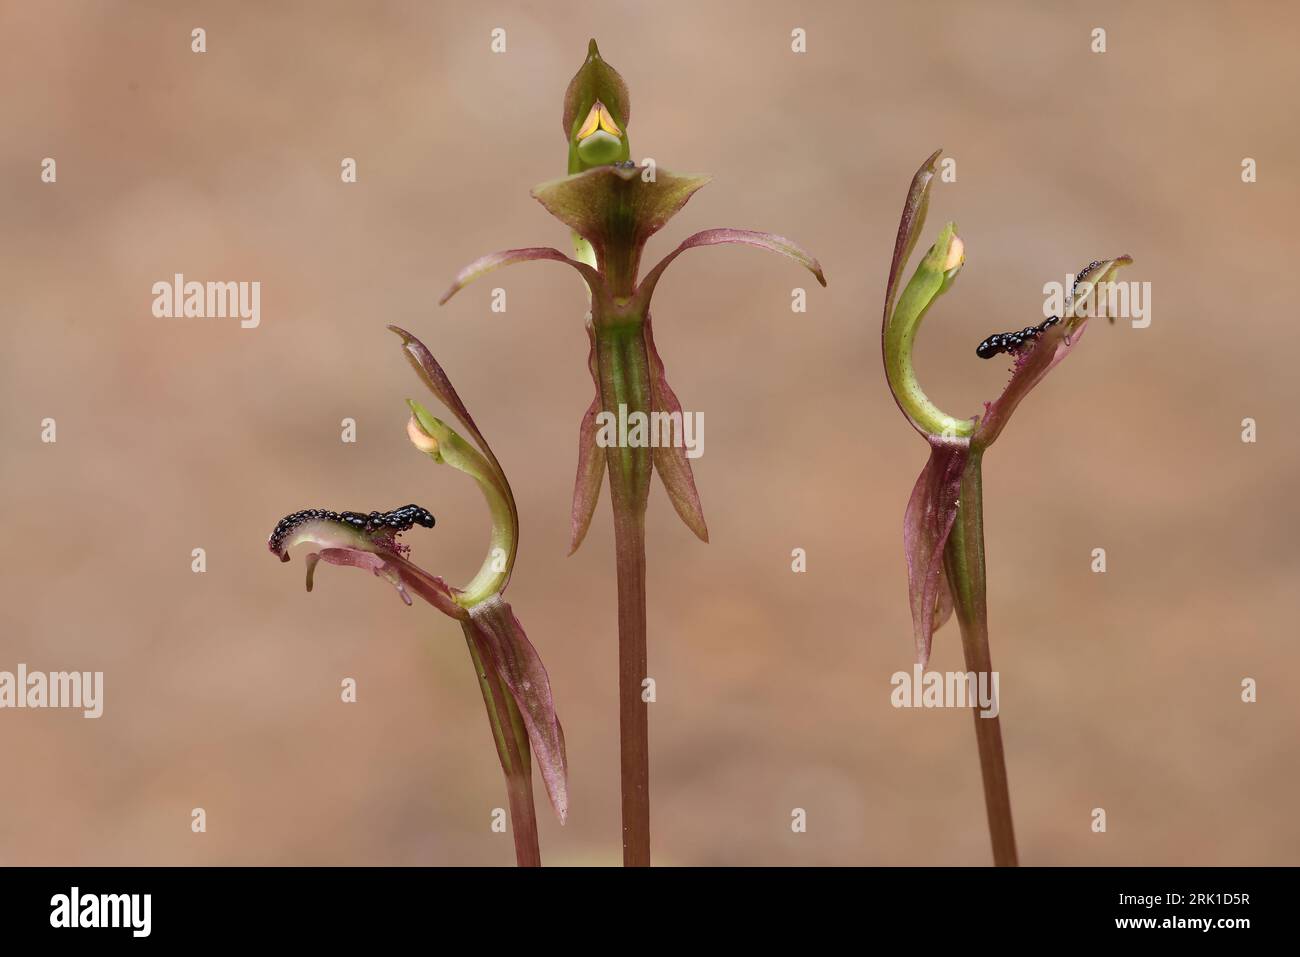 Australian Common Ant Orchids growing in group Stock Photo